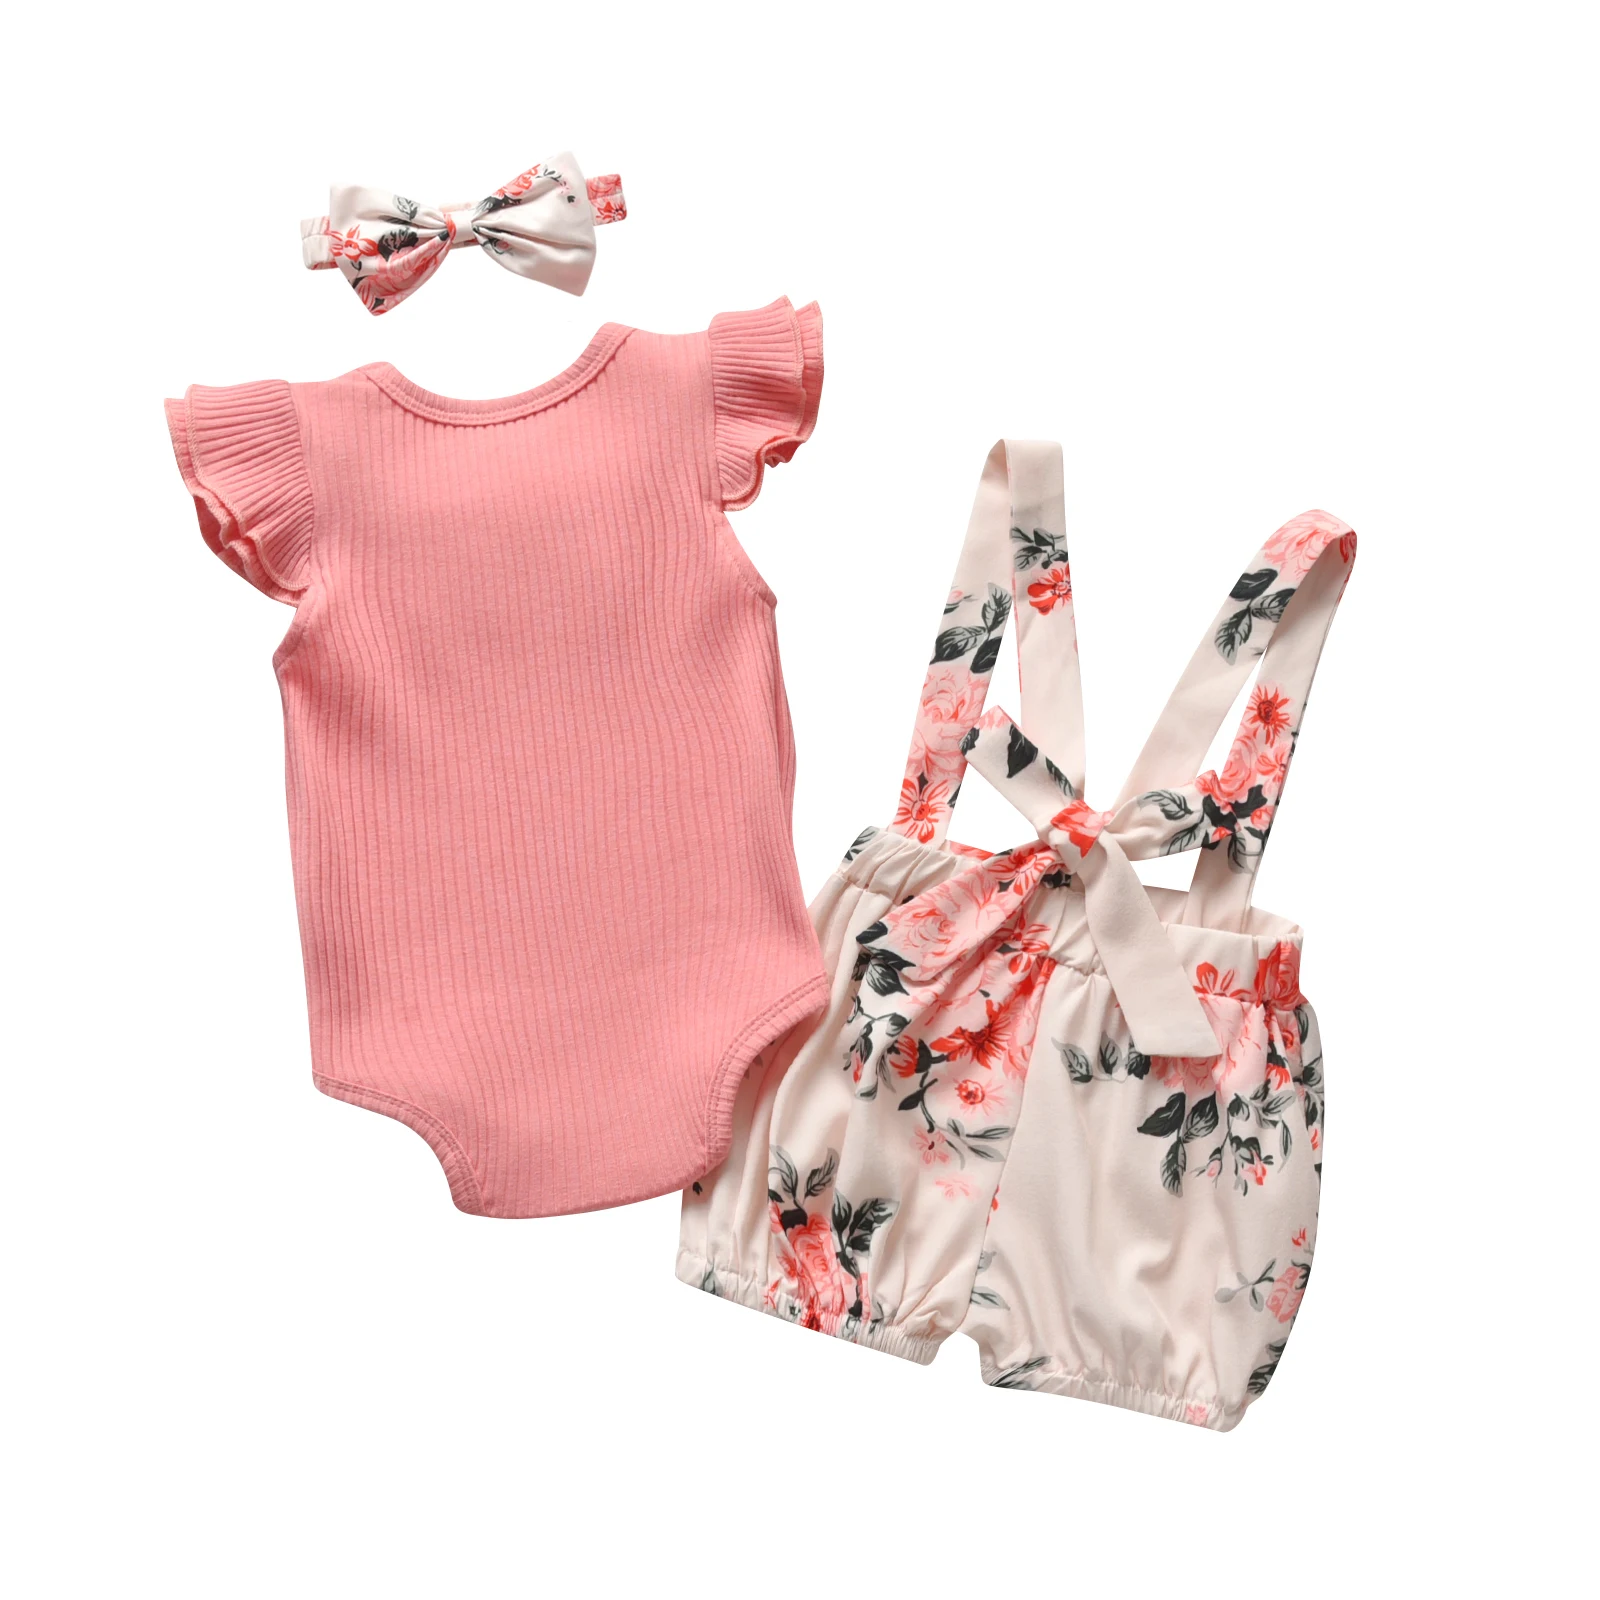 Summer Newborn Maternity Outfit Baby Girls Clothing Sets Short Sleeve Bodysuits For Infants+Floral Overall Shorts+Headband Suit baby dress set for girl